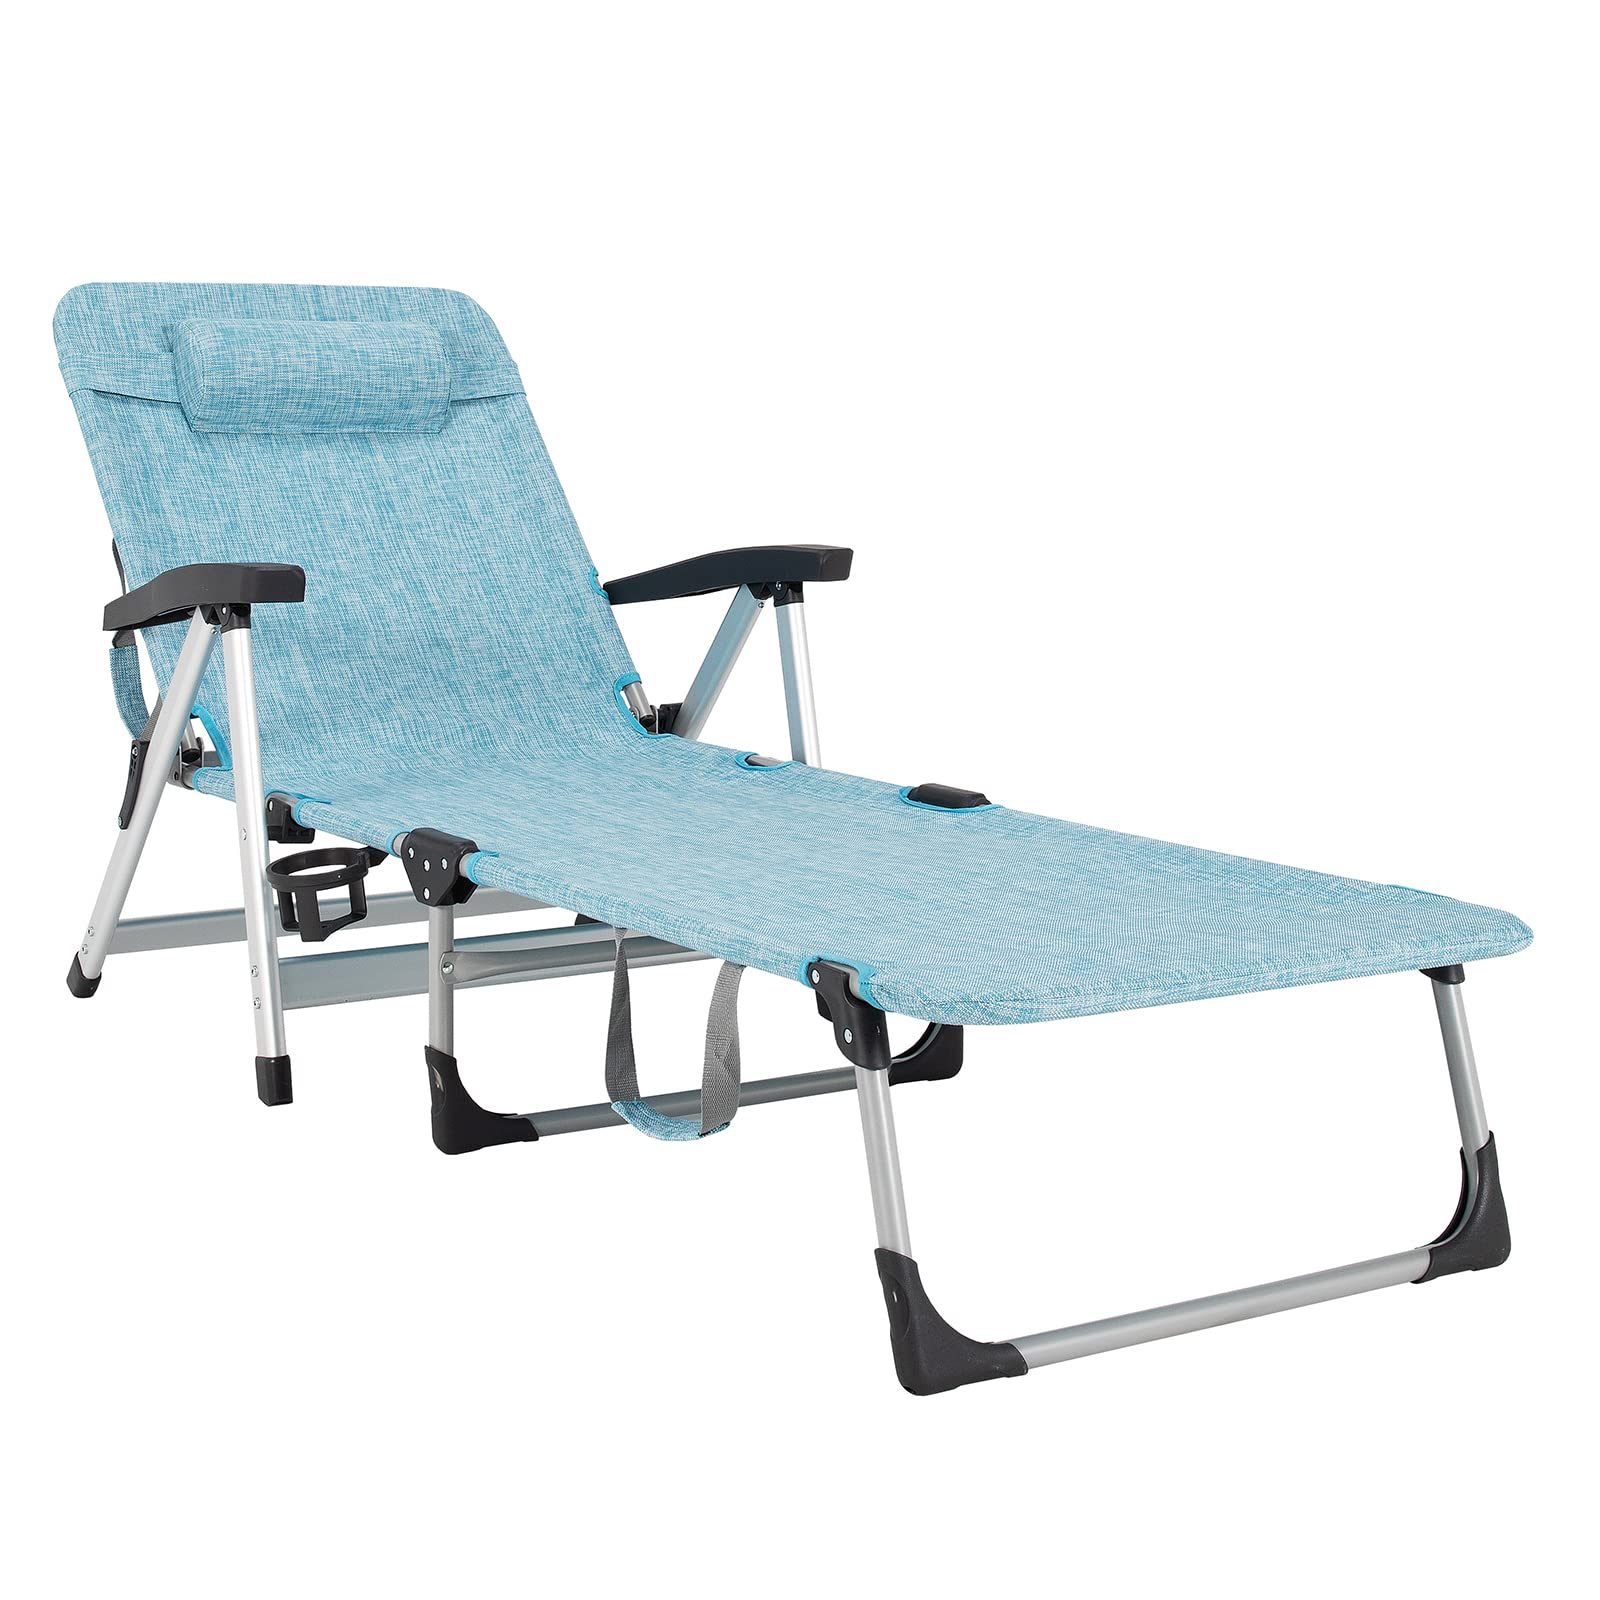 Patio Chaise Lounge Chair 7 Adjustable Position Folding Camping Cot